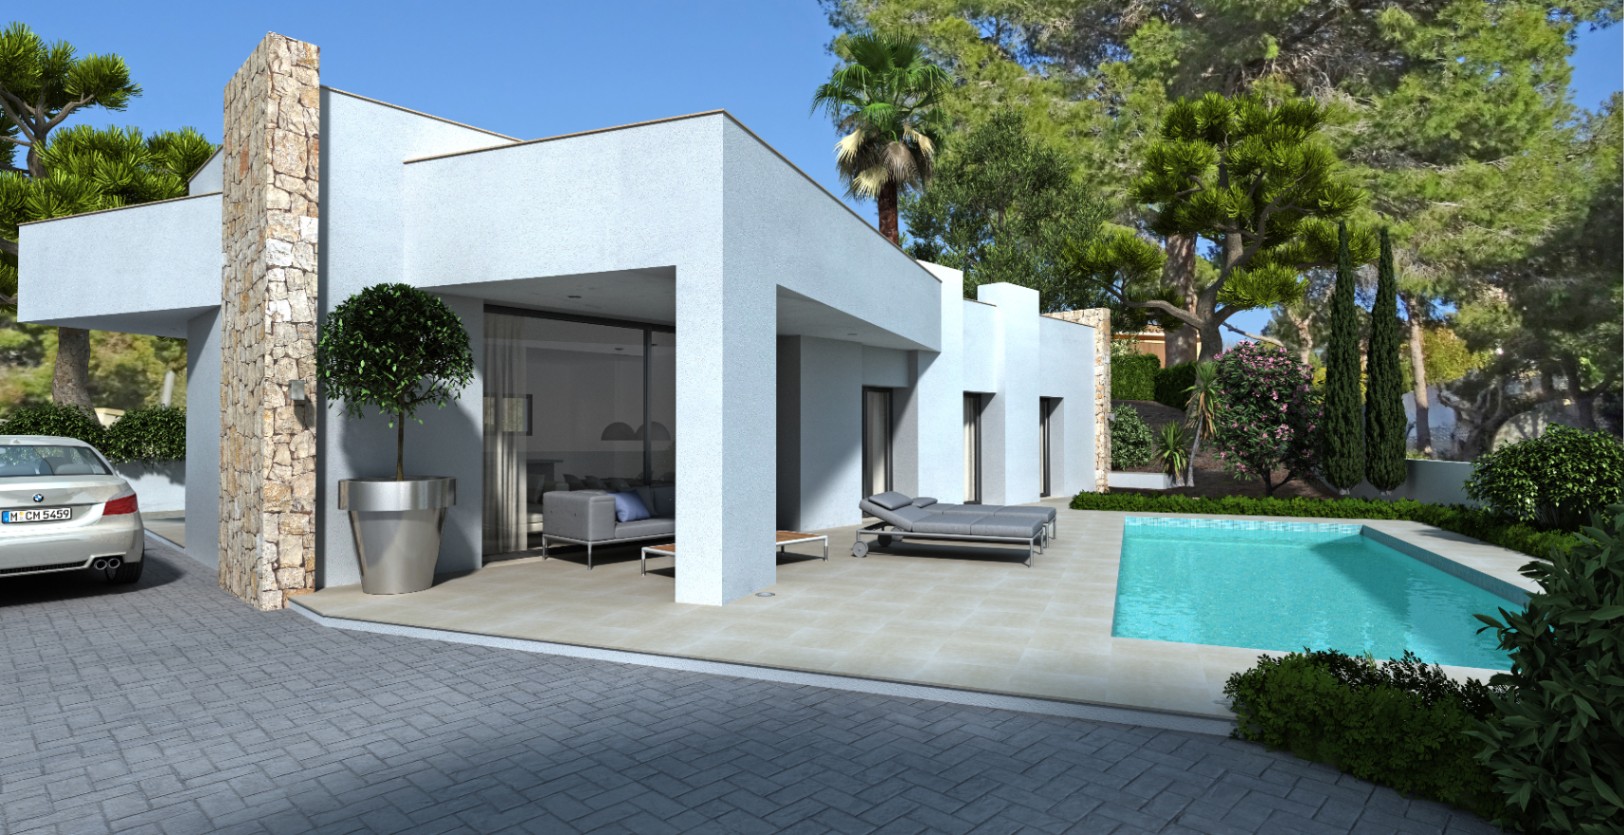 NEW PROJECT 500M FROM THE SEA